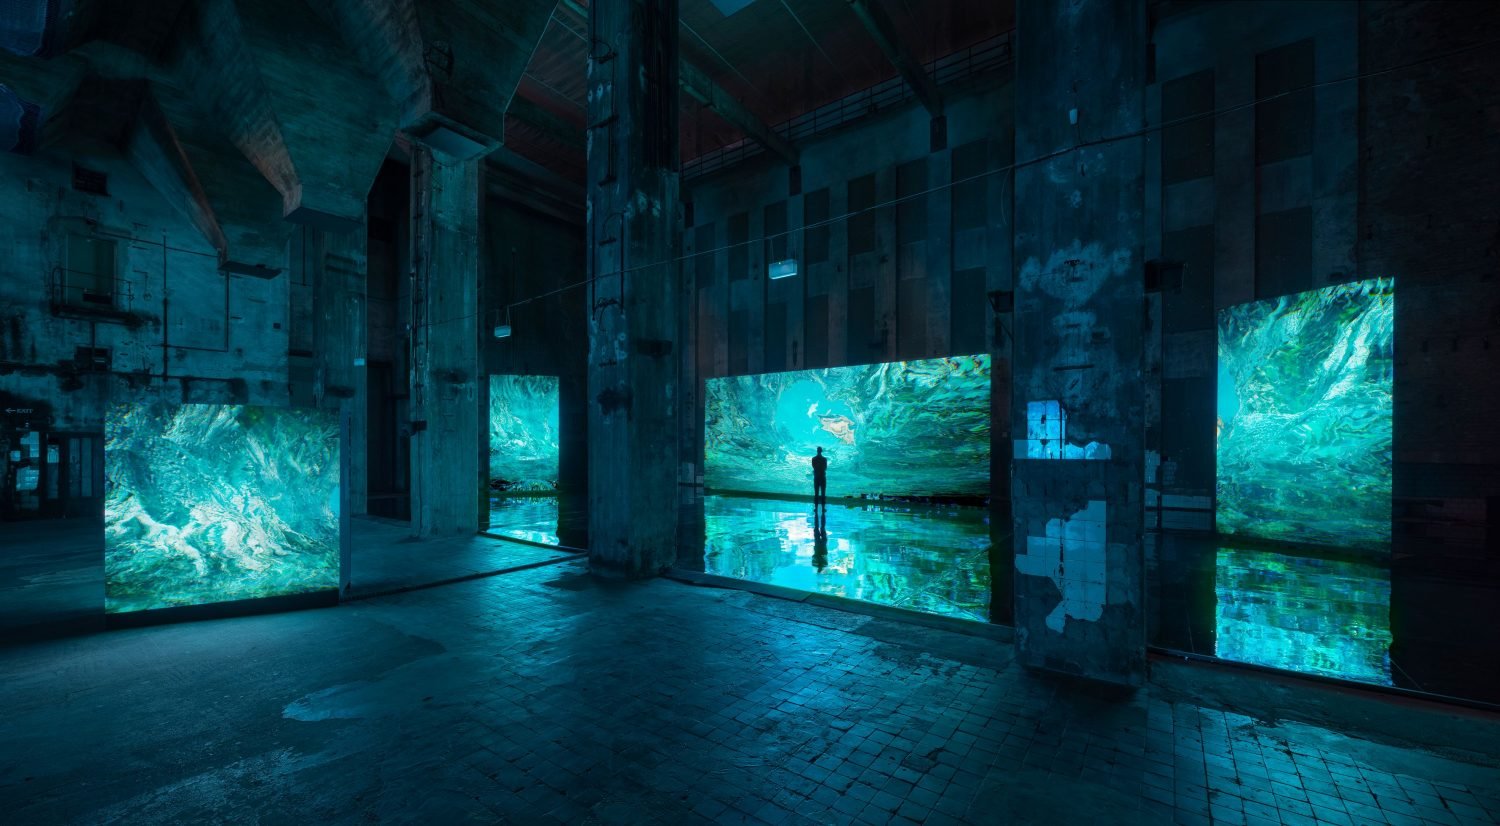 An Artist Just Transformed Berlin's Berghain Nightclub Into an Eerie,  Immersive 3D Swamp—See Images Here